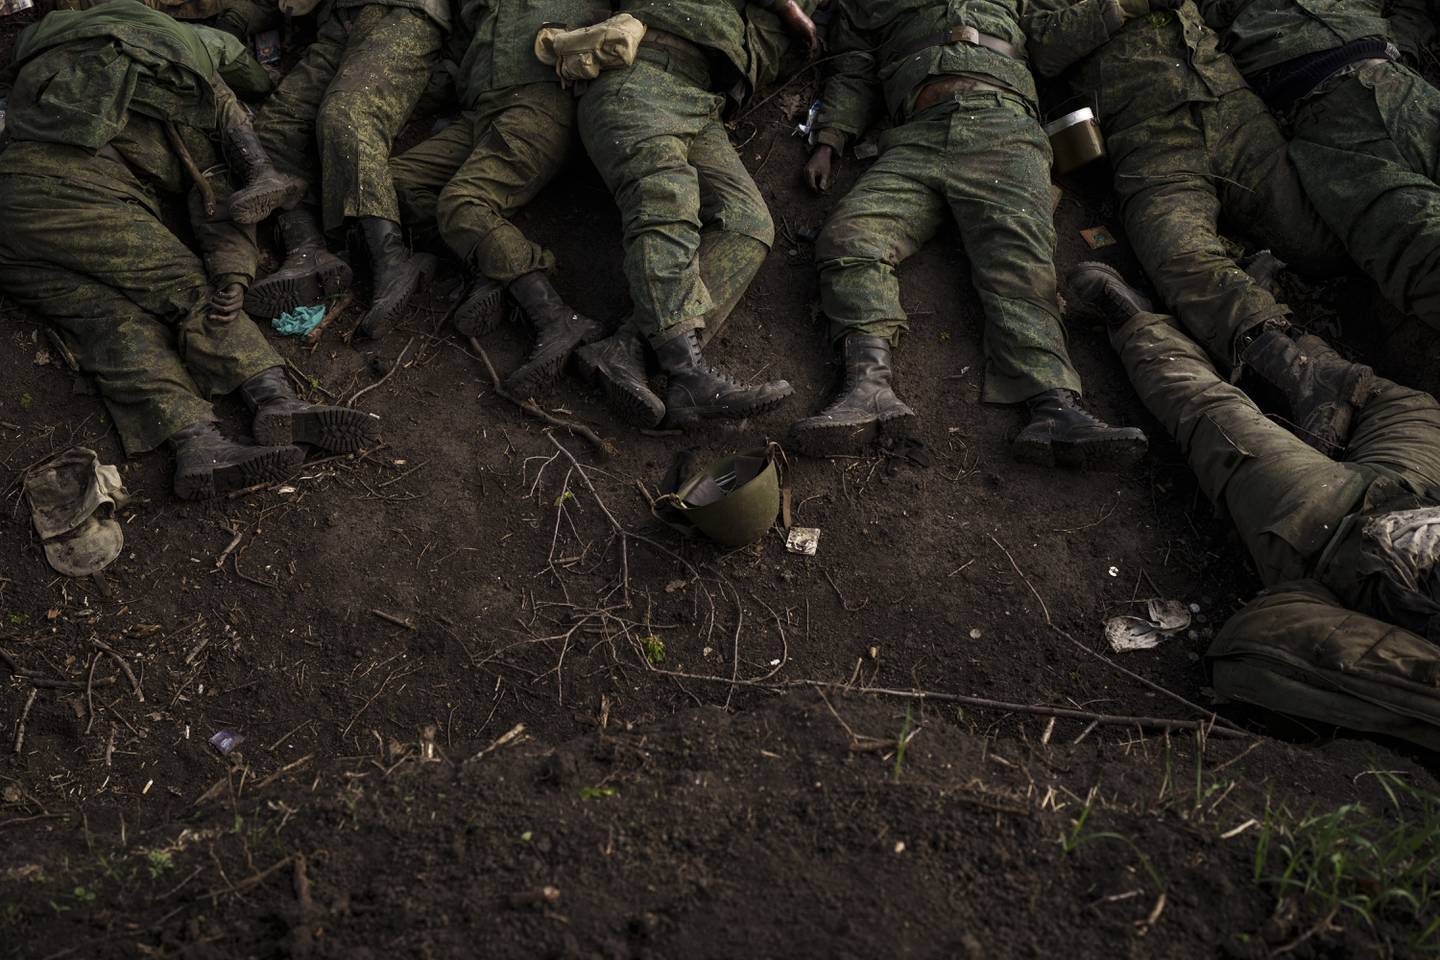 FILE - The bodies of 11 Russian soldiers lie on the ground in the village of Vilkhivka, recently retaken by Ukrainian forces near Kharkiv, Ukraine, Monday, May 9, 2022. More than half a million people have been killed or seriously injured in two years of war in Ukraine, according to Western intelligence estimates -- a human toll not seen in Europe since World War II. (AP Photo/Felipe Dana, File)